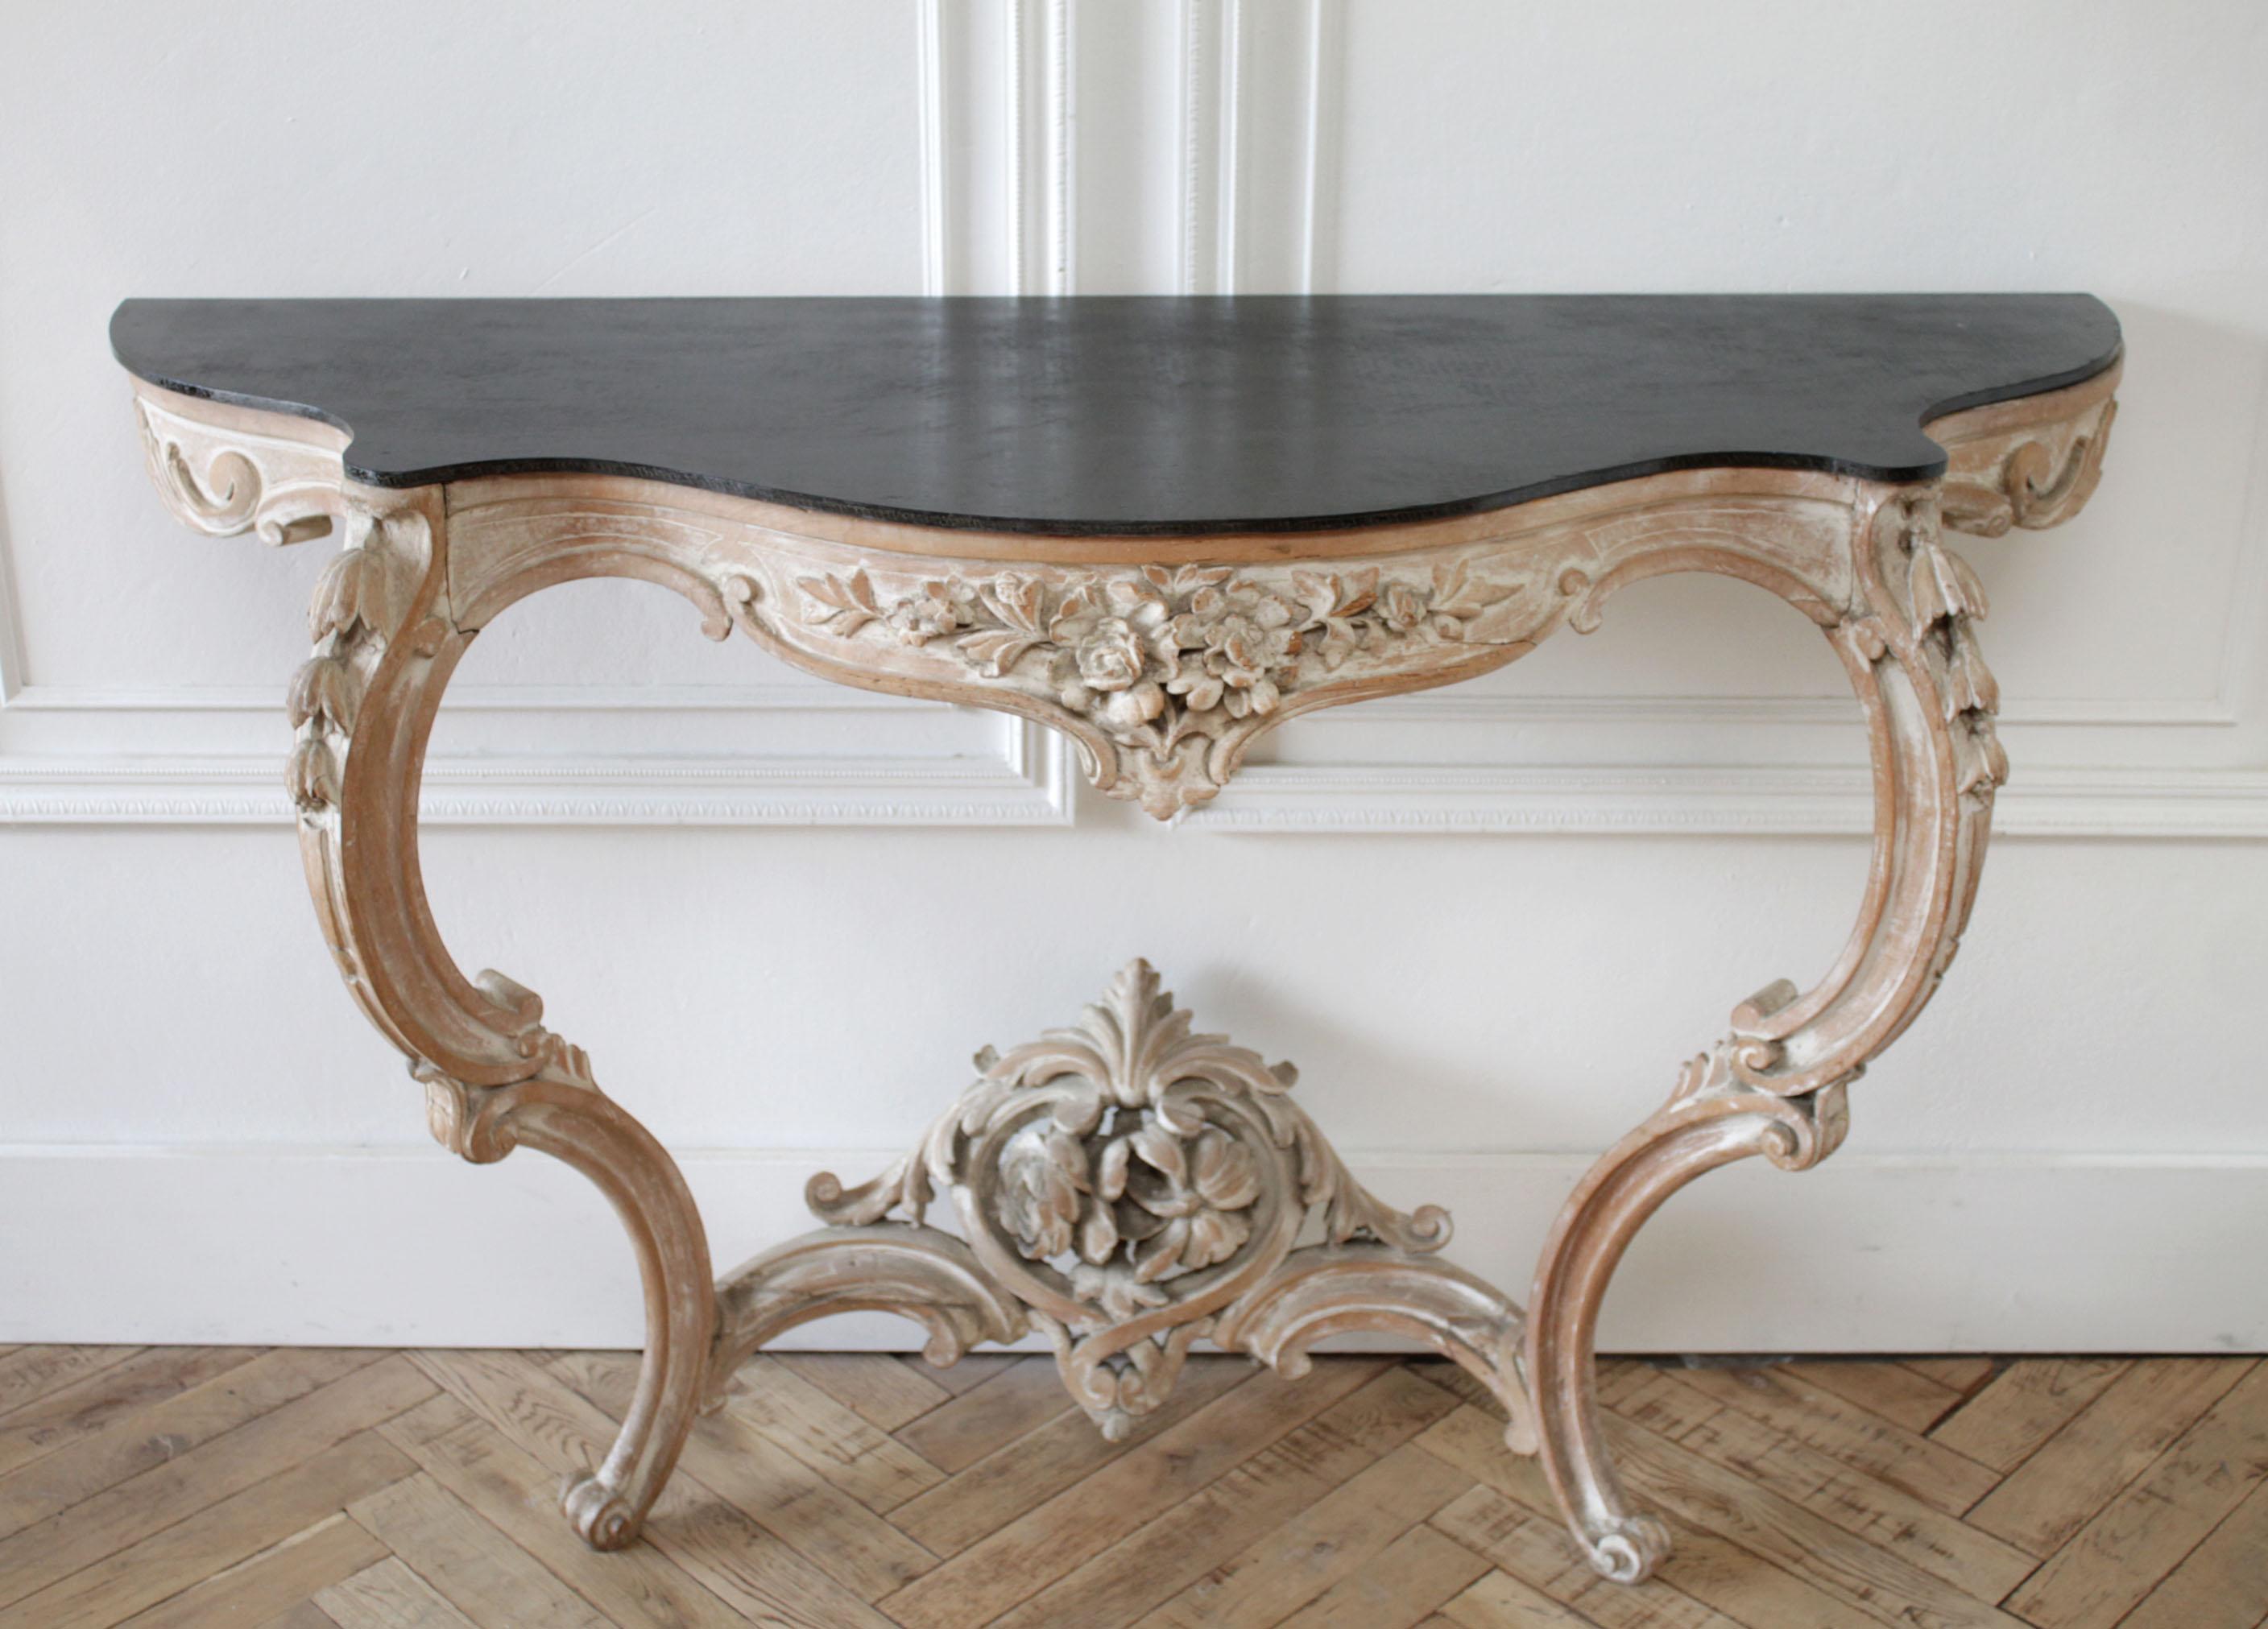 Antique Louis XV style French carved console wall table
circa 19th-early 20th century, stripped down to the natural wood with a white wash pickled effect.
The top is removable, but is wood in a painted black finish.
Stone can be added.
Must be